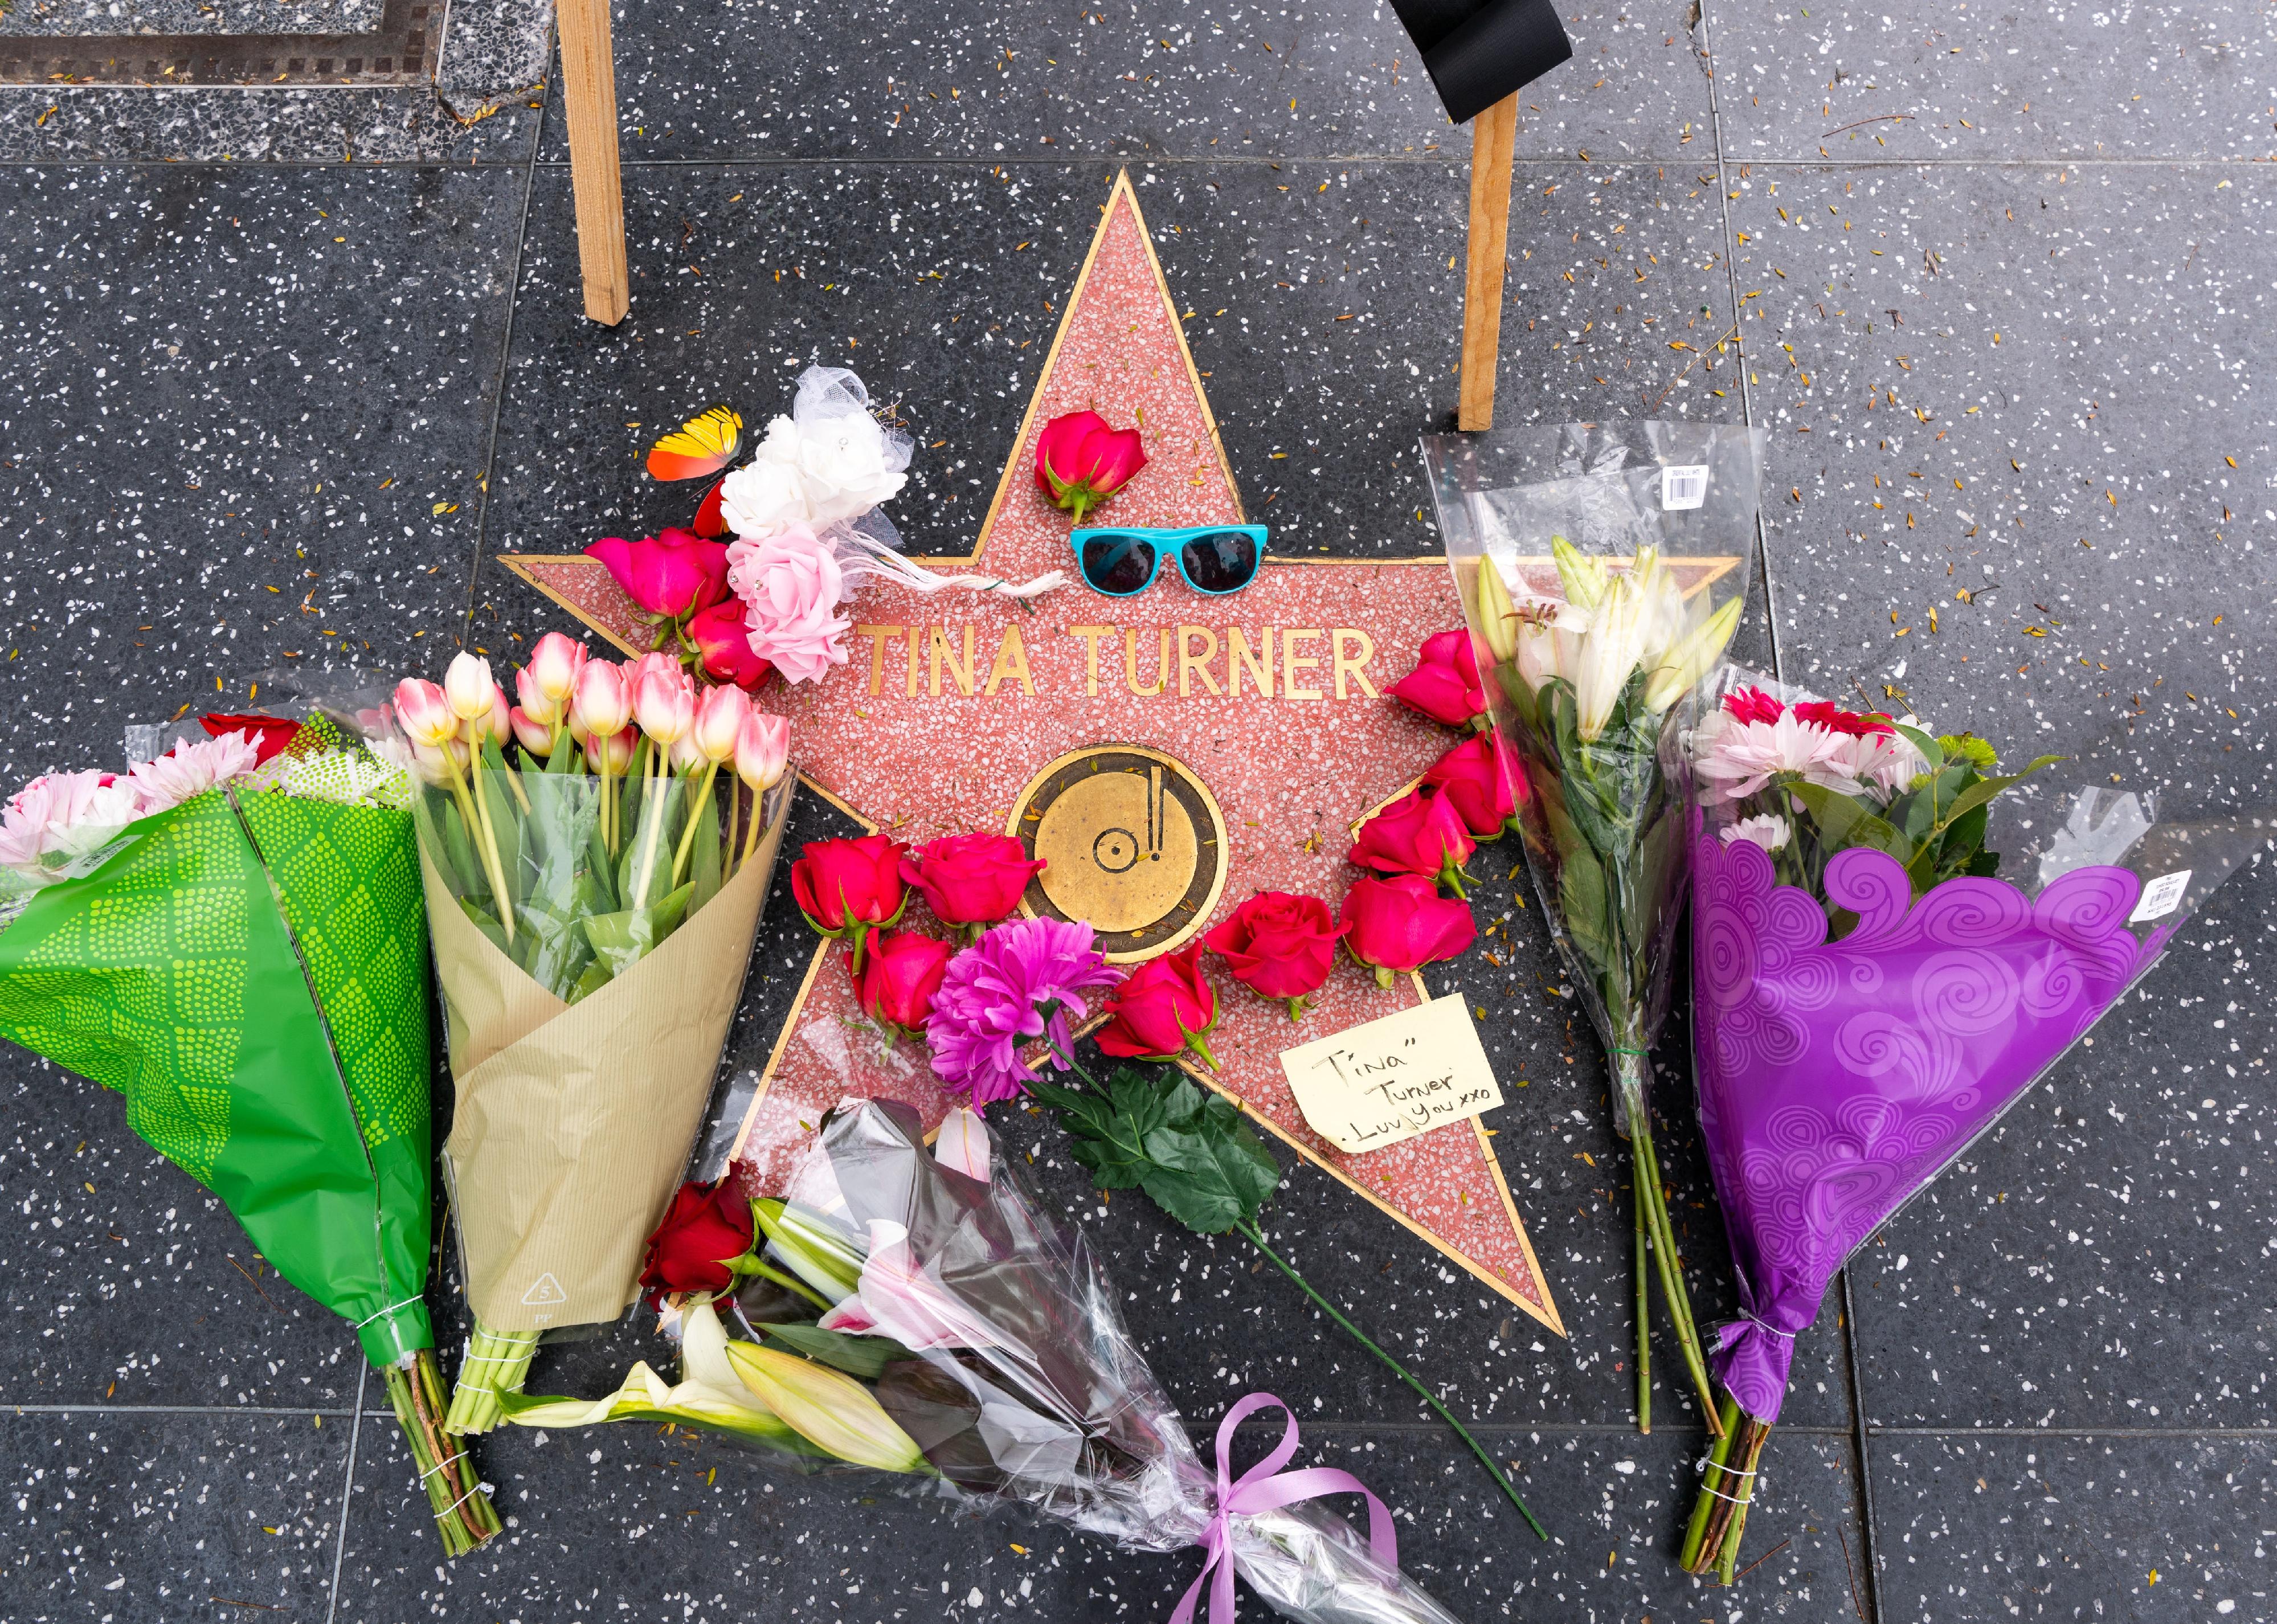 Flowers and memorabilia at Tina Turner's star on the Walk of Fame.